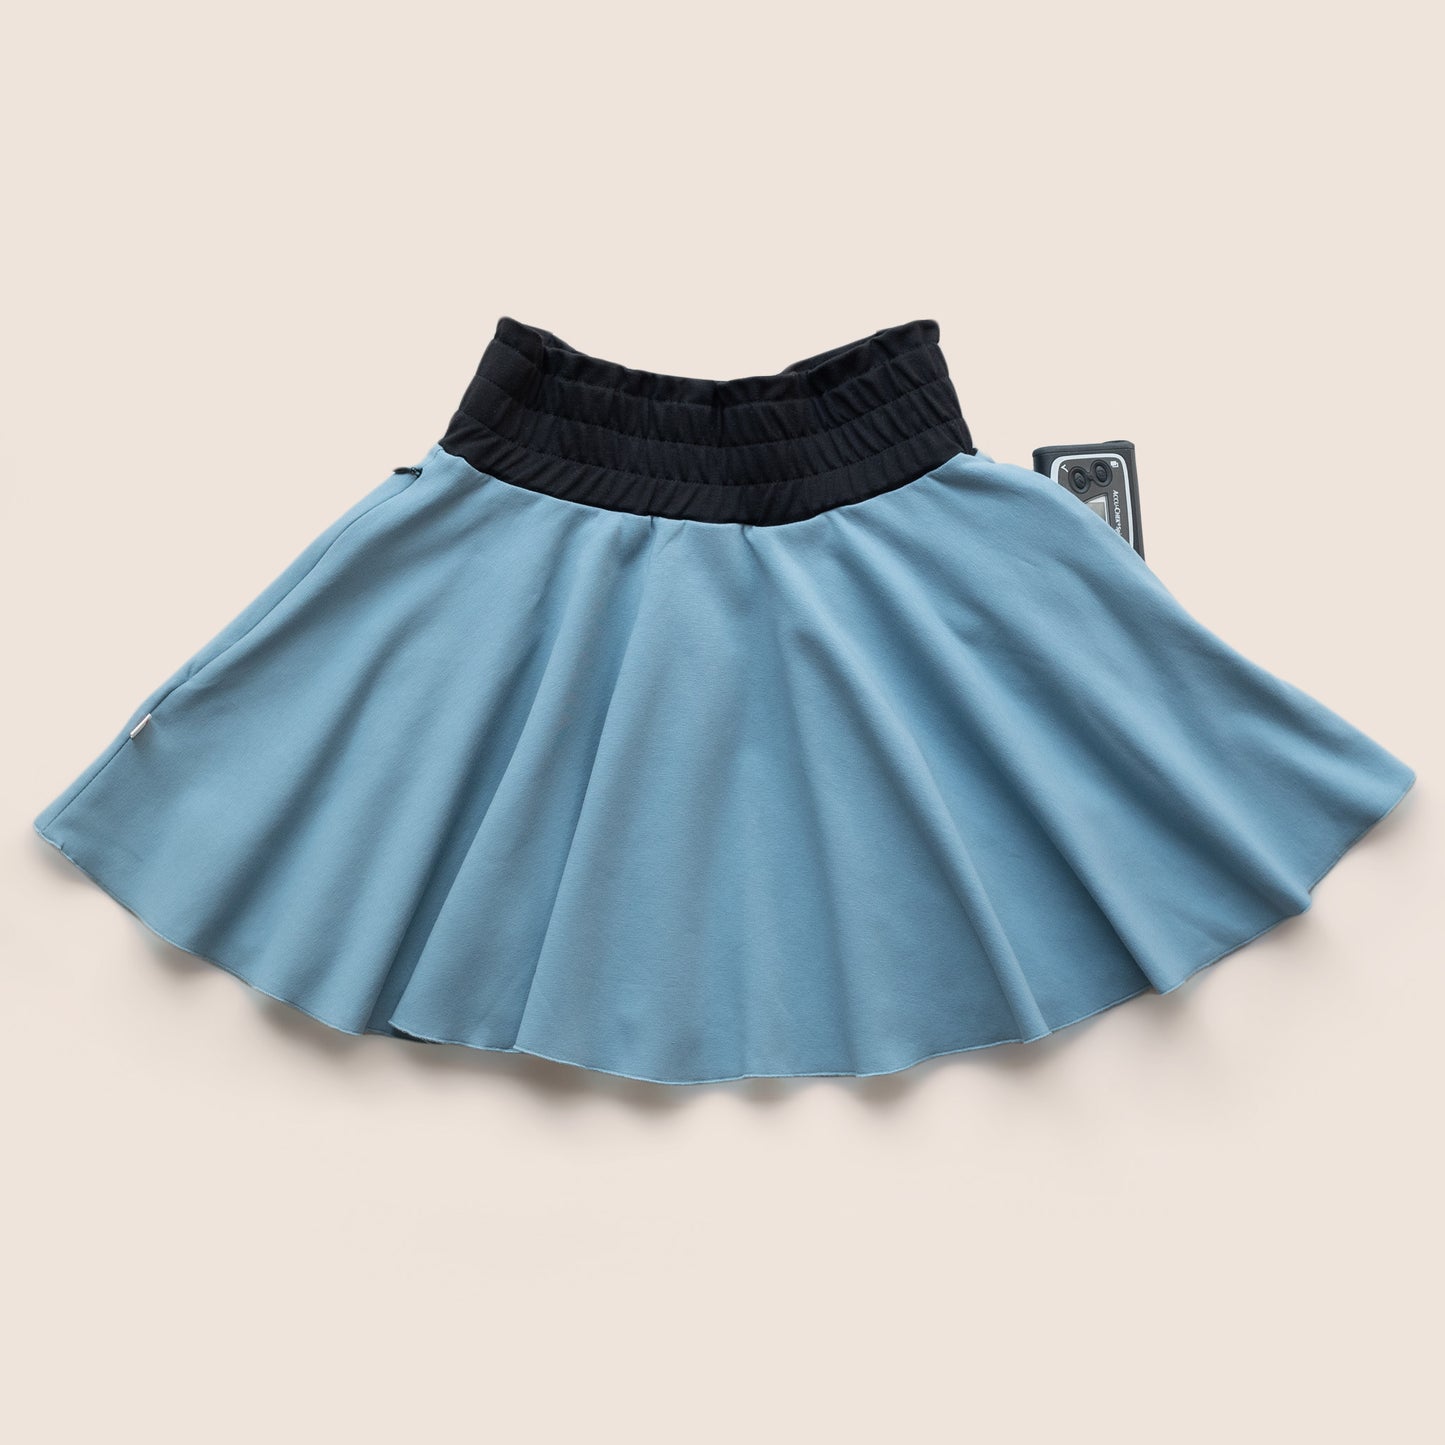 Type 1 Diabetes Clothing - Girls Skirt Sky Blue with pockets | Our Pocket Hero